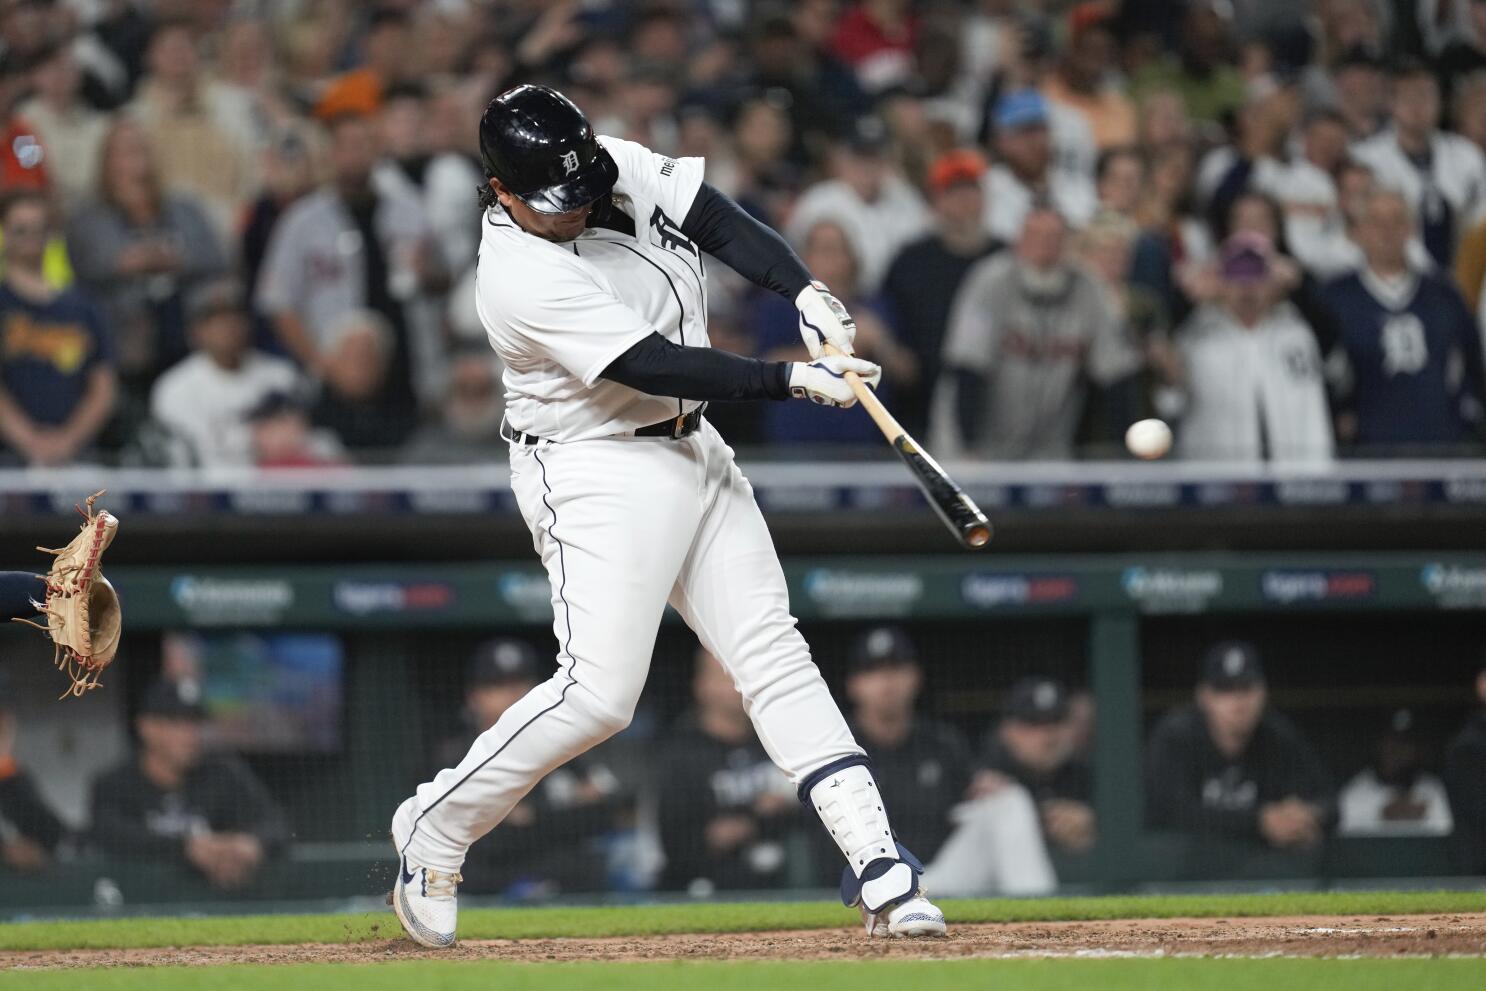 With a carefree sense of ease, Miguel Cabrera made hitting excellence look  like a breeze